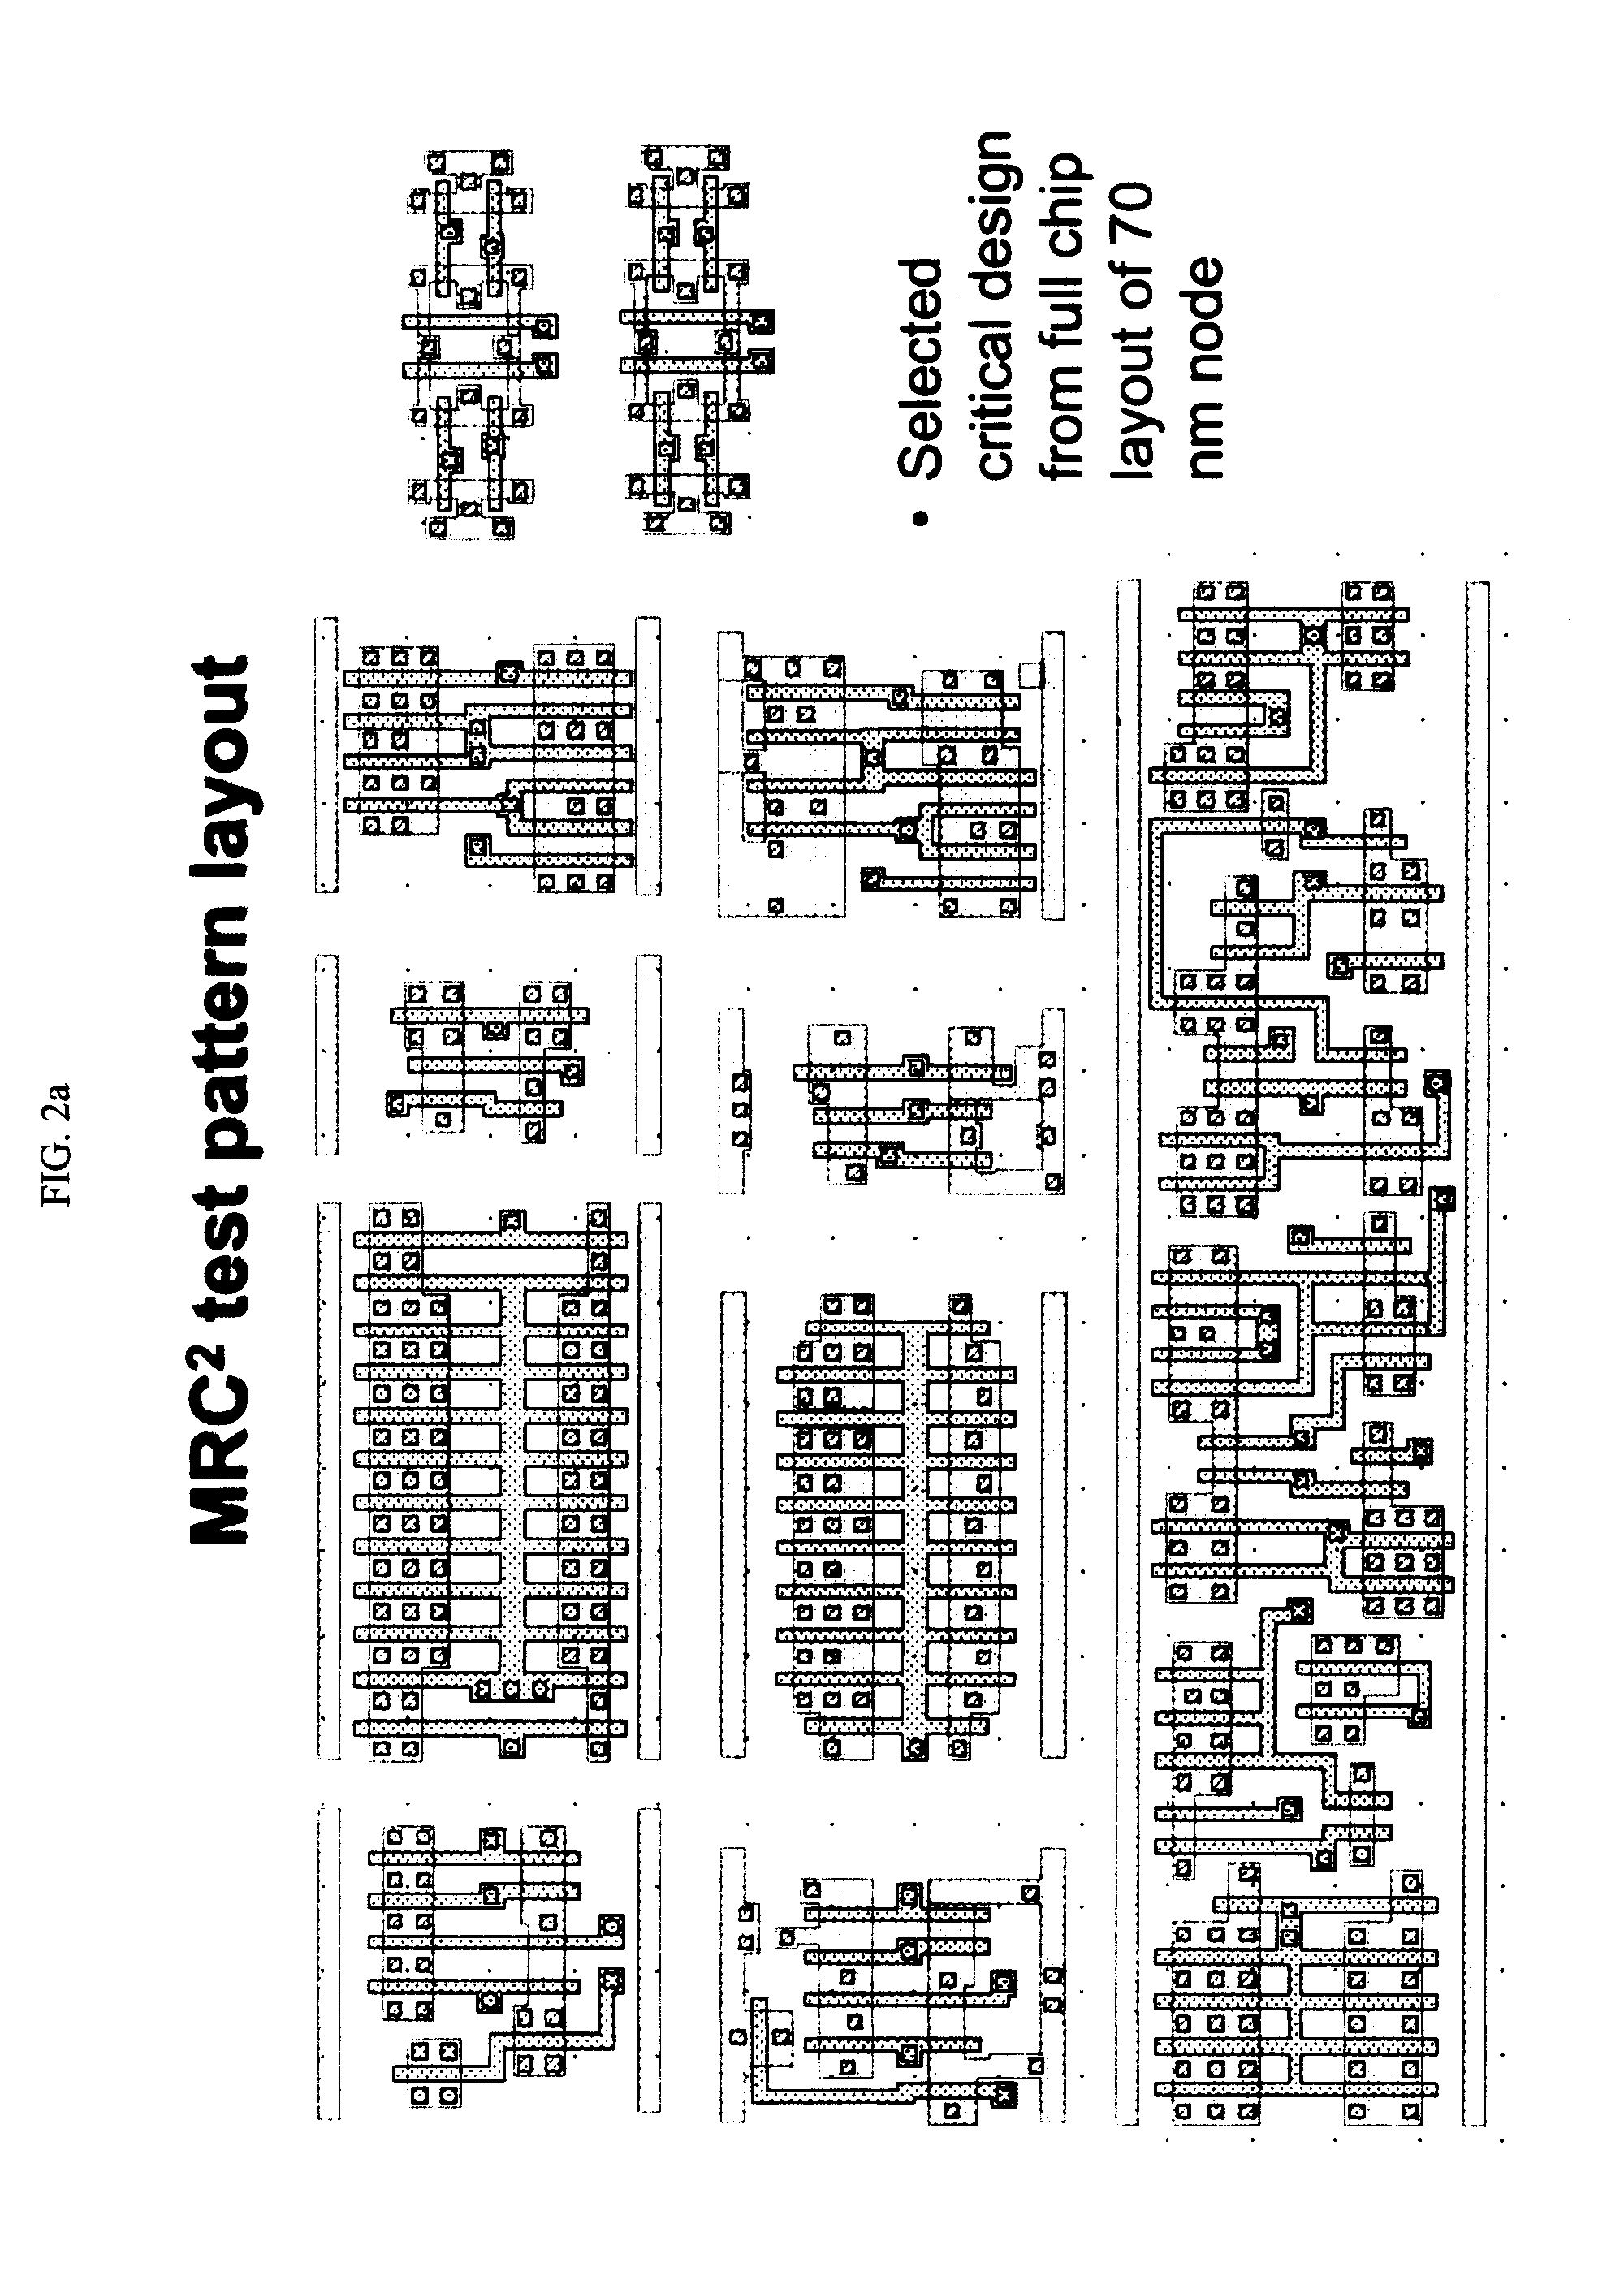 Method for performing full-chip manufacturing reliability checking and correction